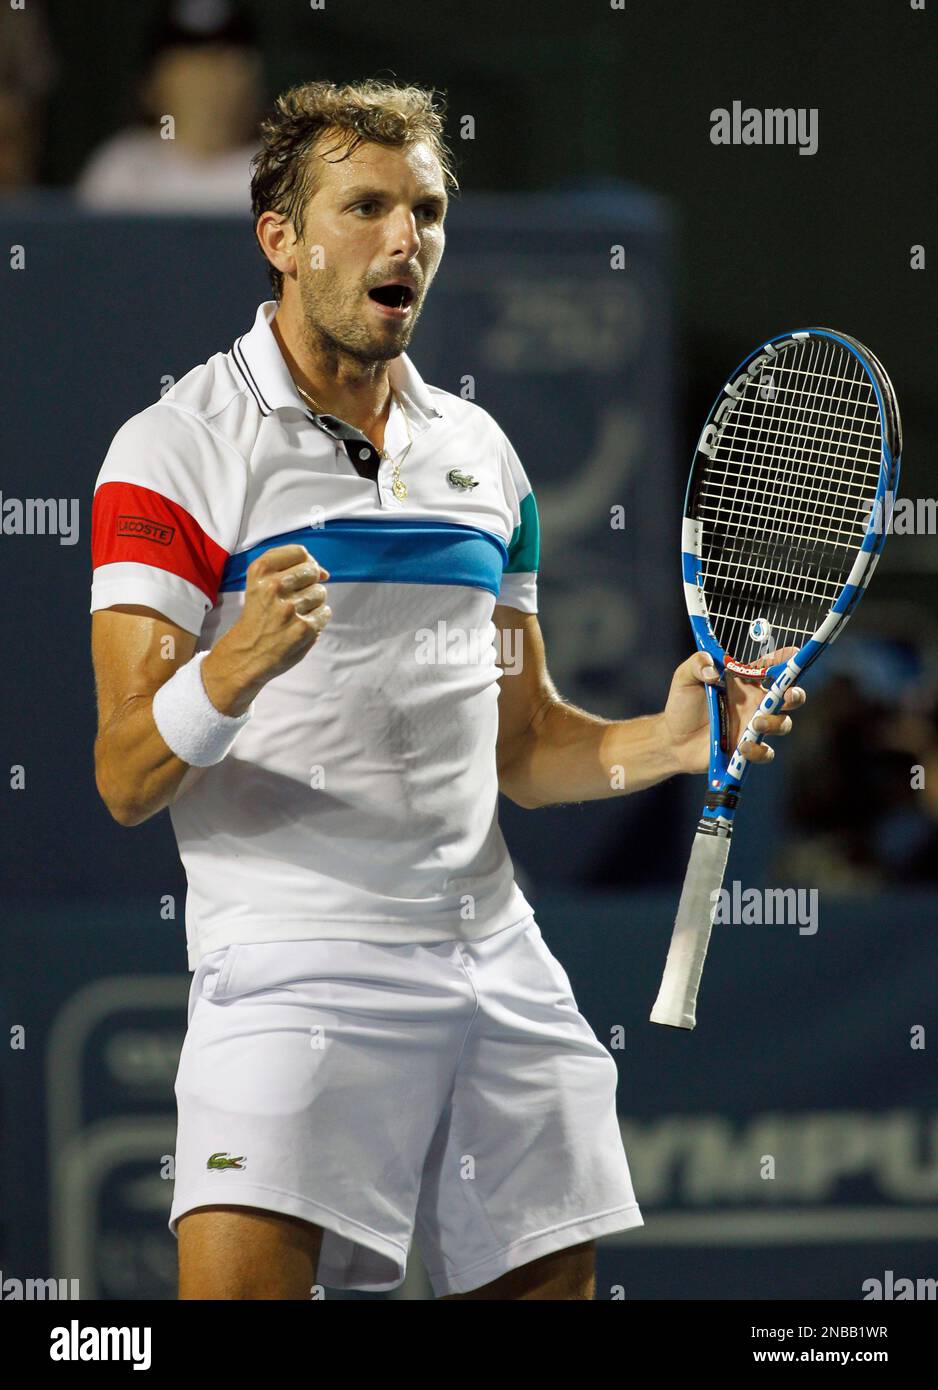 Julien Benneteau, of France, celebrates a point against Robin Haase, of the  Netherlands, during semifinal play at the Winston-Salem Open tennis  tournament in Winston-Salem, N.C., Friday, Aug. 26, 2011. Benneteau won 3-6,